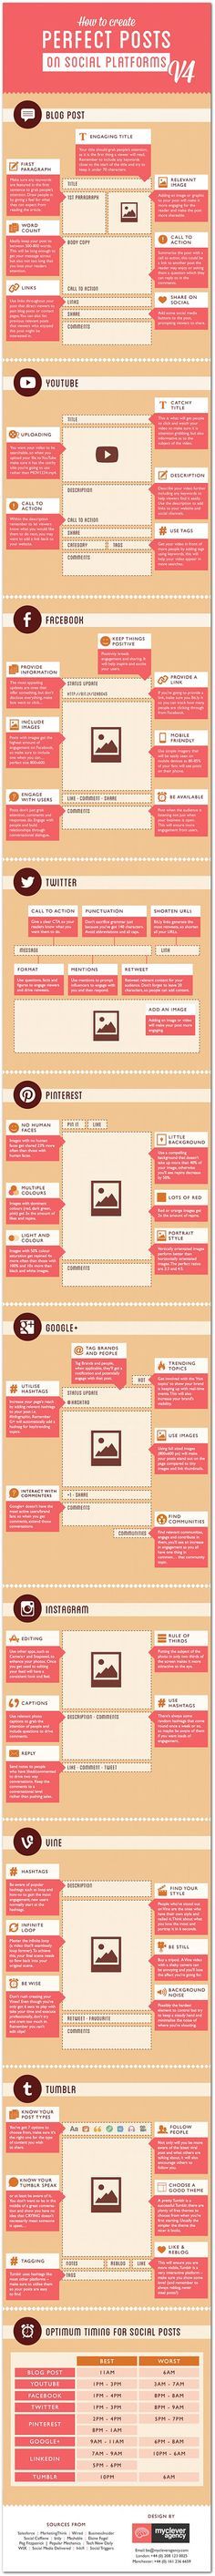 [INFOGRAPHIC] Guide to Perfect Social Media Posts for a blog; YouTube; Facebook; Twitter; Pinterest; Google+; Instagram; Vine; and Tumblr: Title; Image; First paragraph; Word count; Call-to-action; Links; Social Media share; Best times; Details.